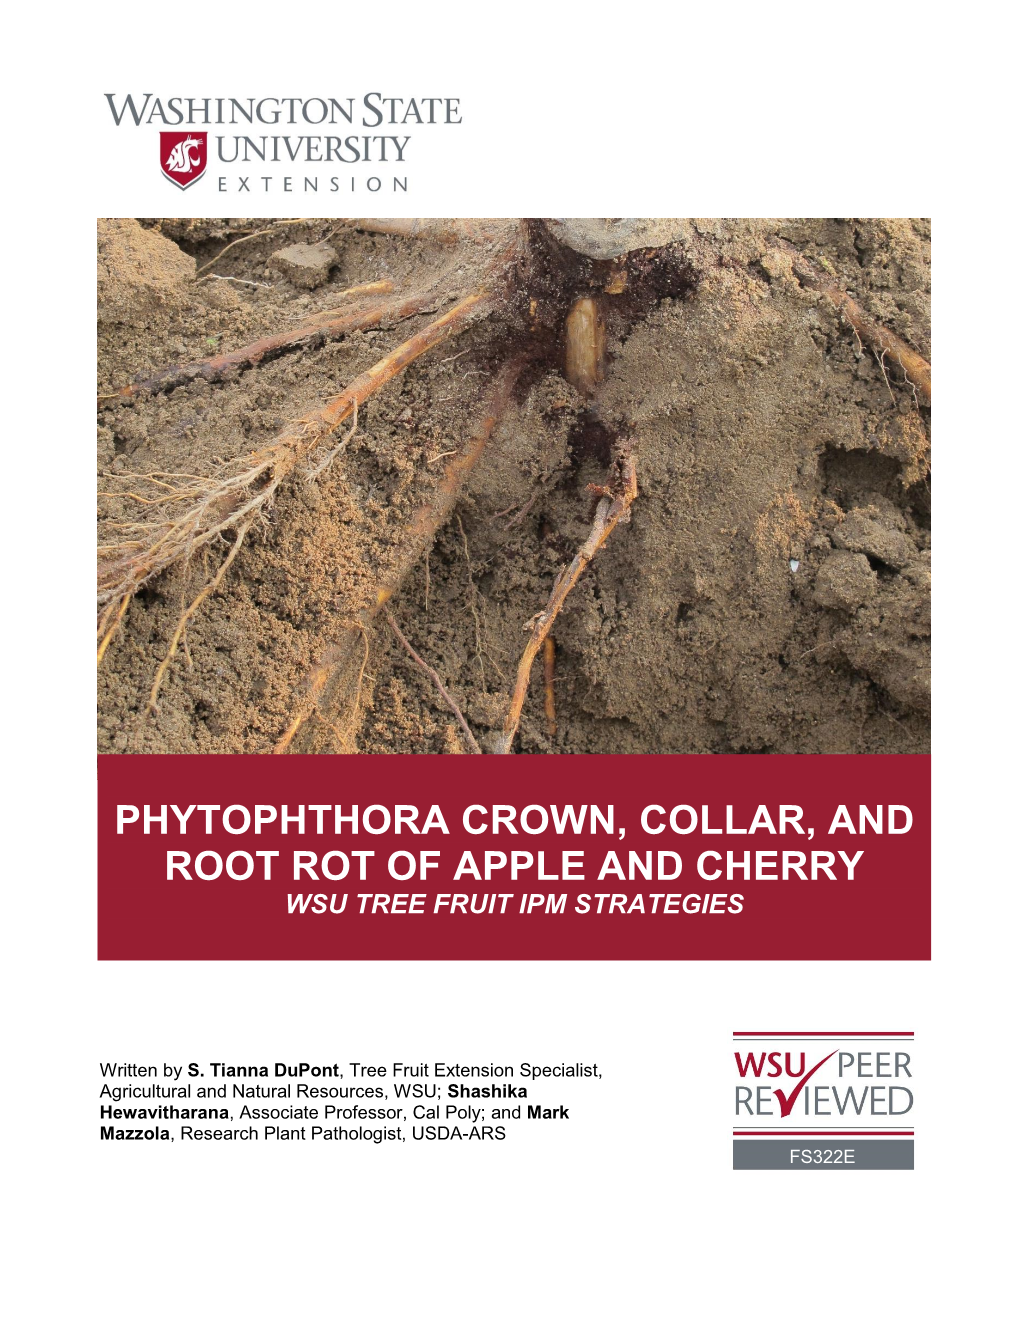 Phytophthora Crown, Collar, and Root Rot of Apple and Cherry Wsu Tree Fruit Ipm Strategies